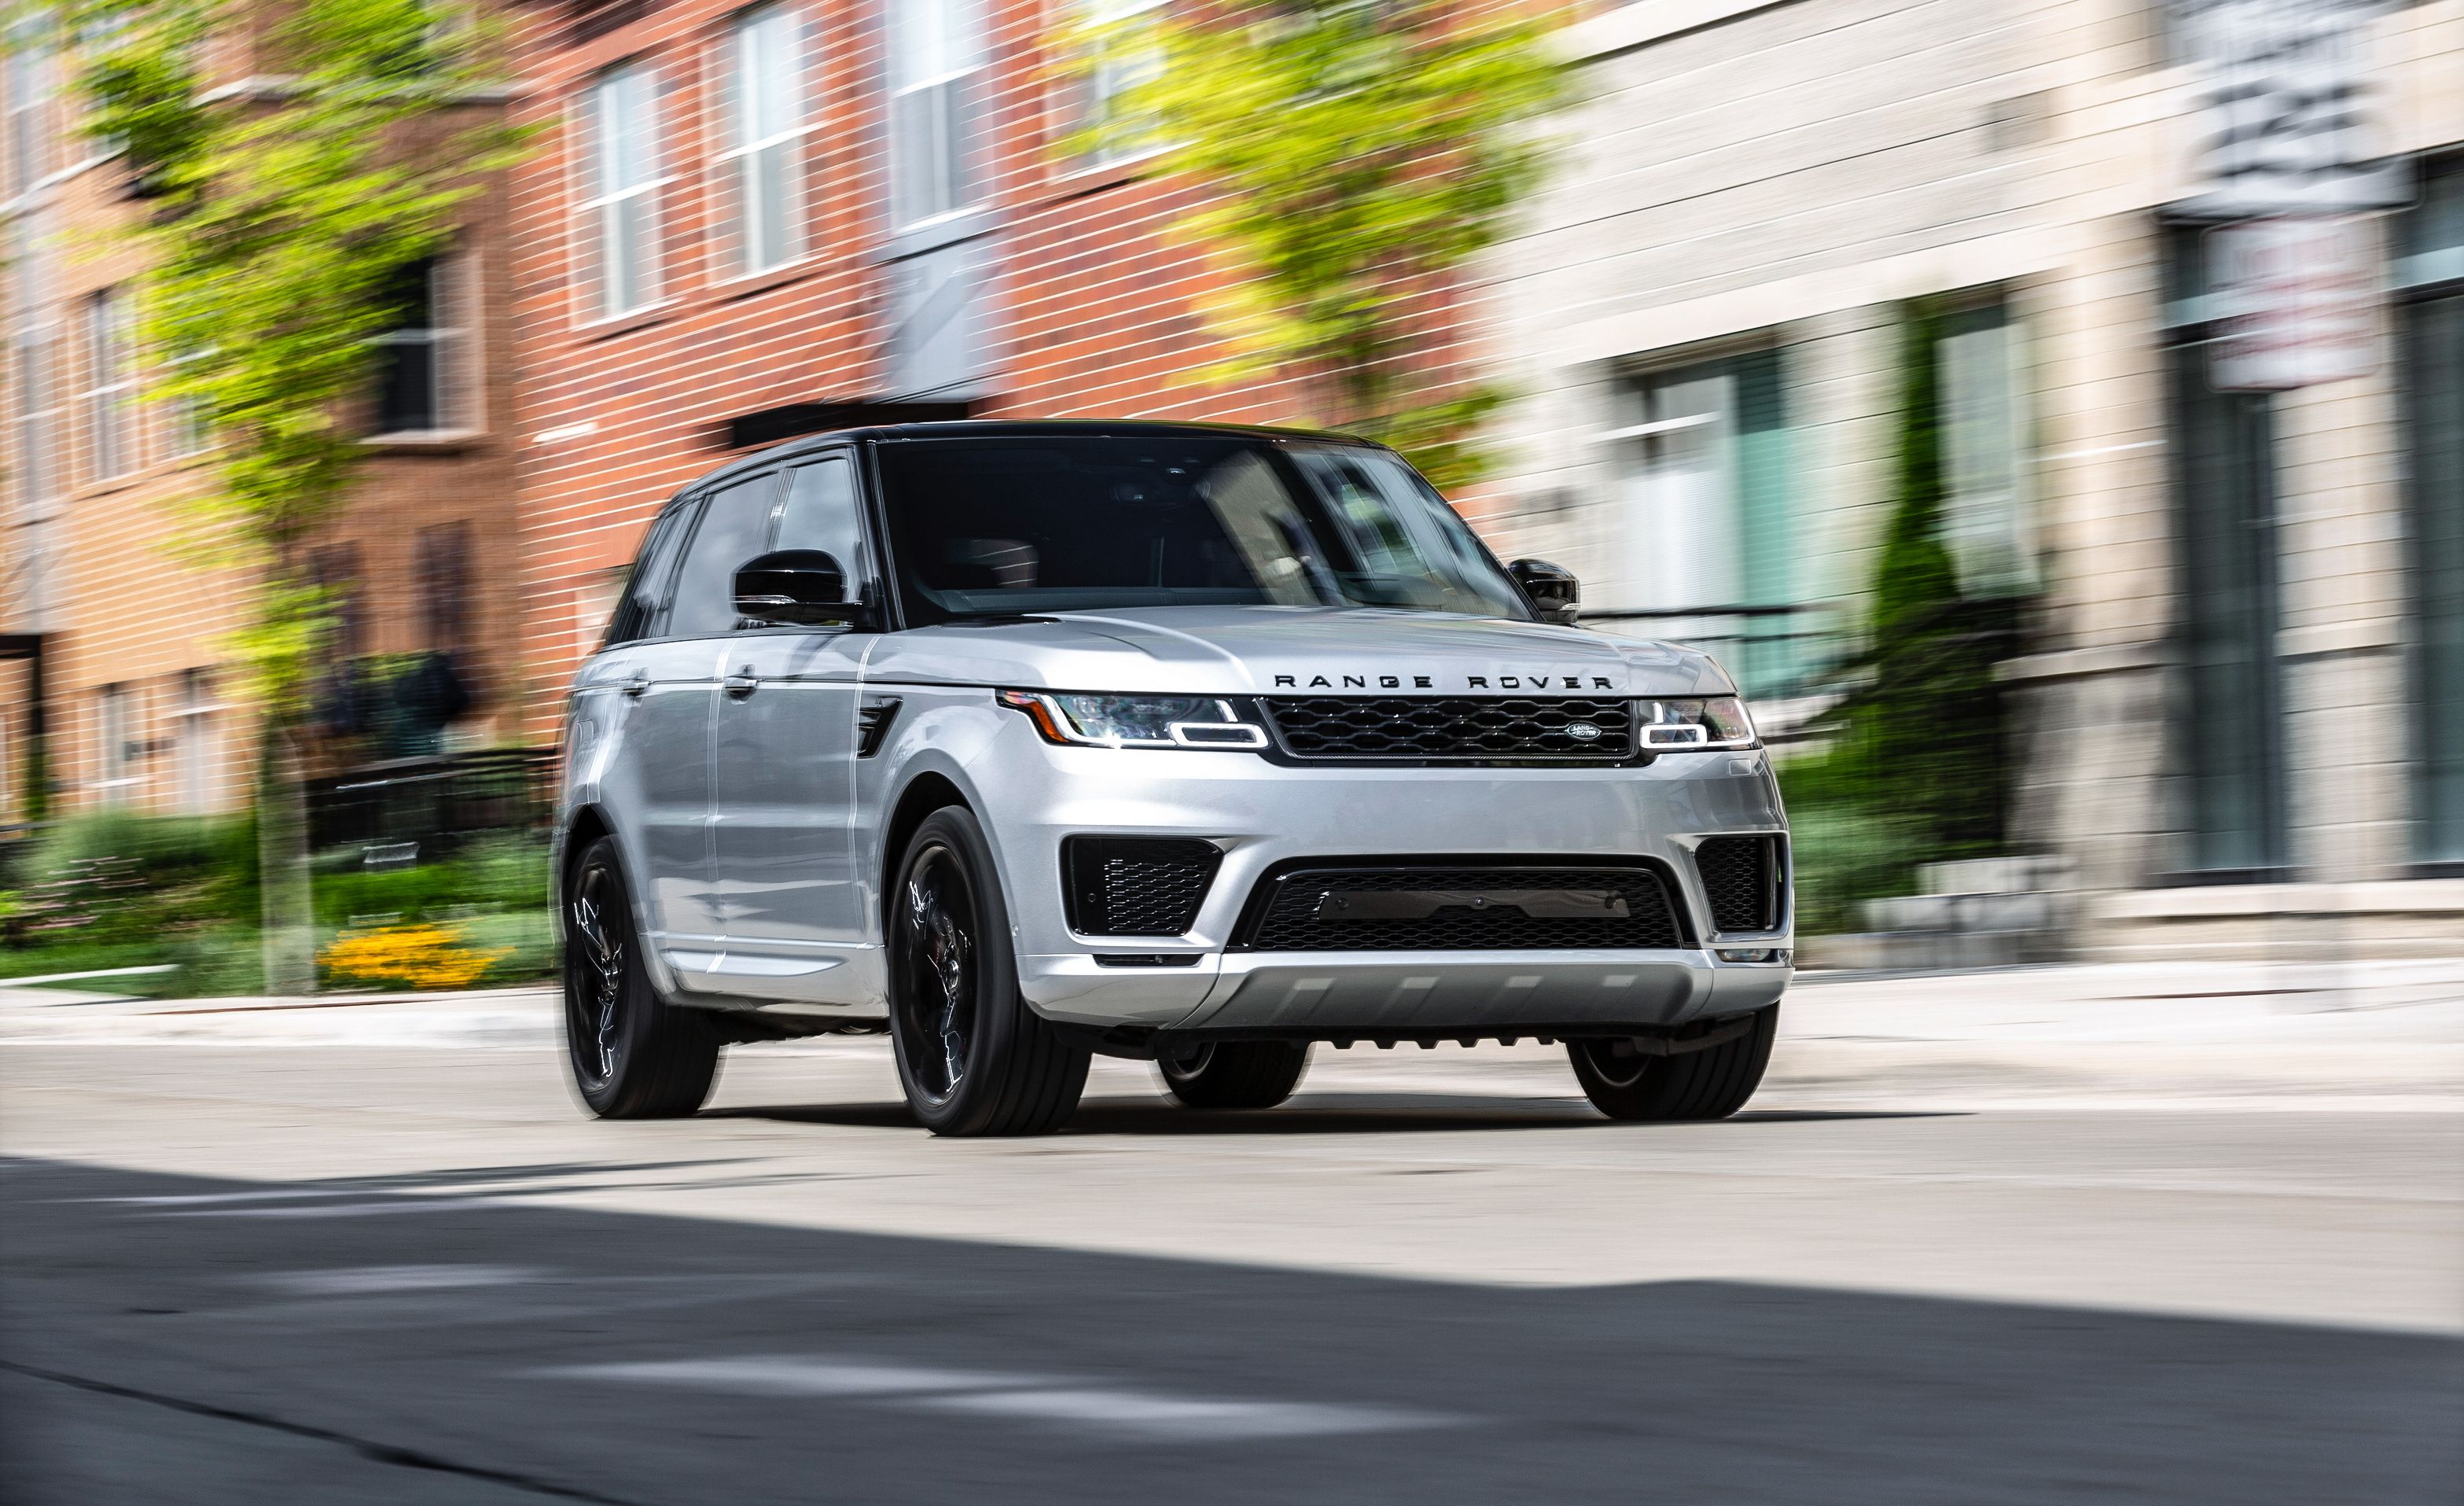 Range Rover Hybrid Engine Review  : Check Out ⭐ The New Land Rover Range Rover Hybrid ⭐ Test Drive Review: